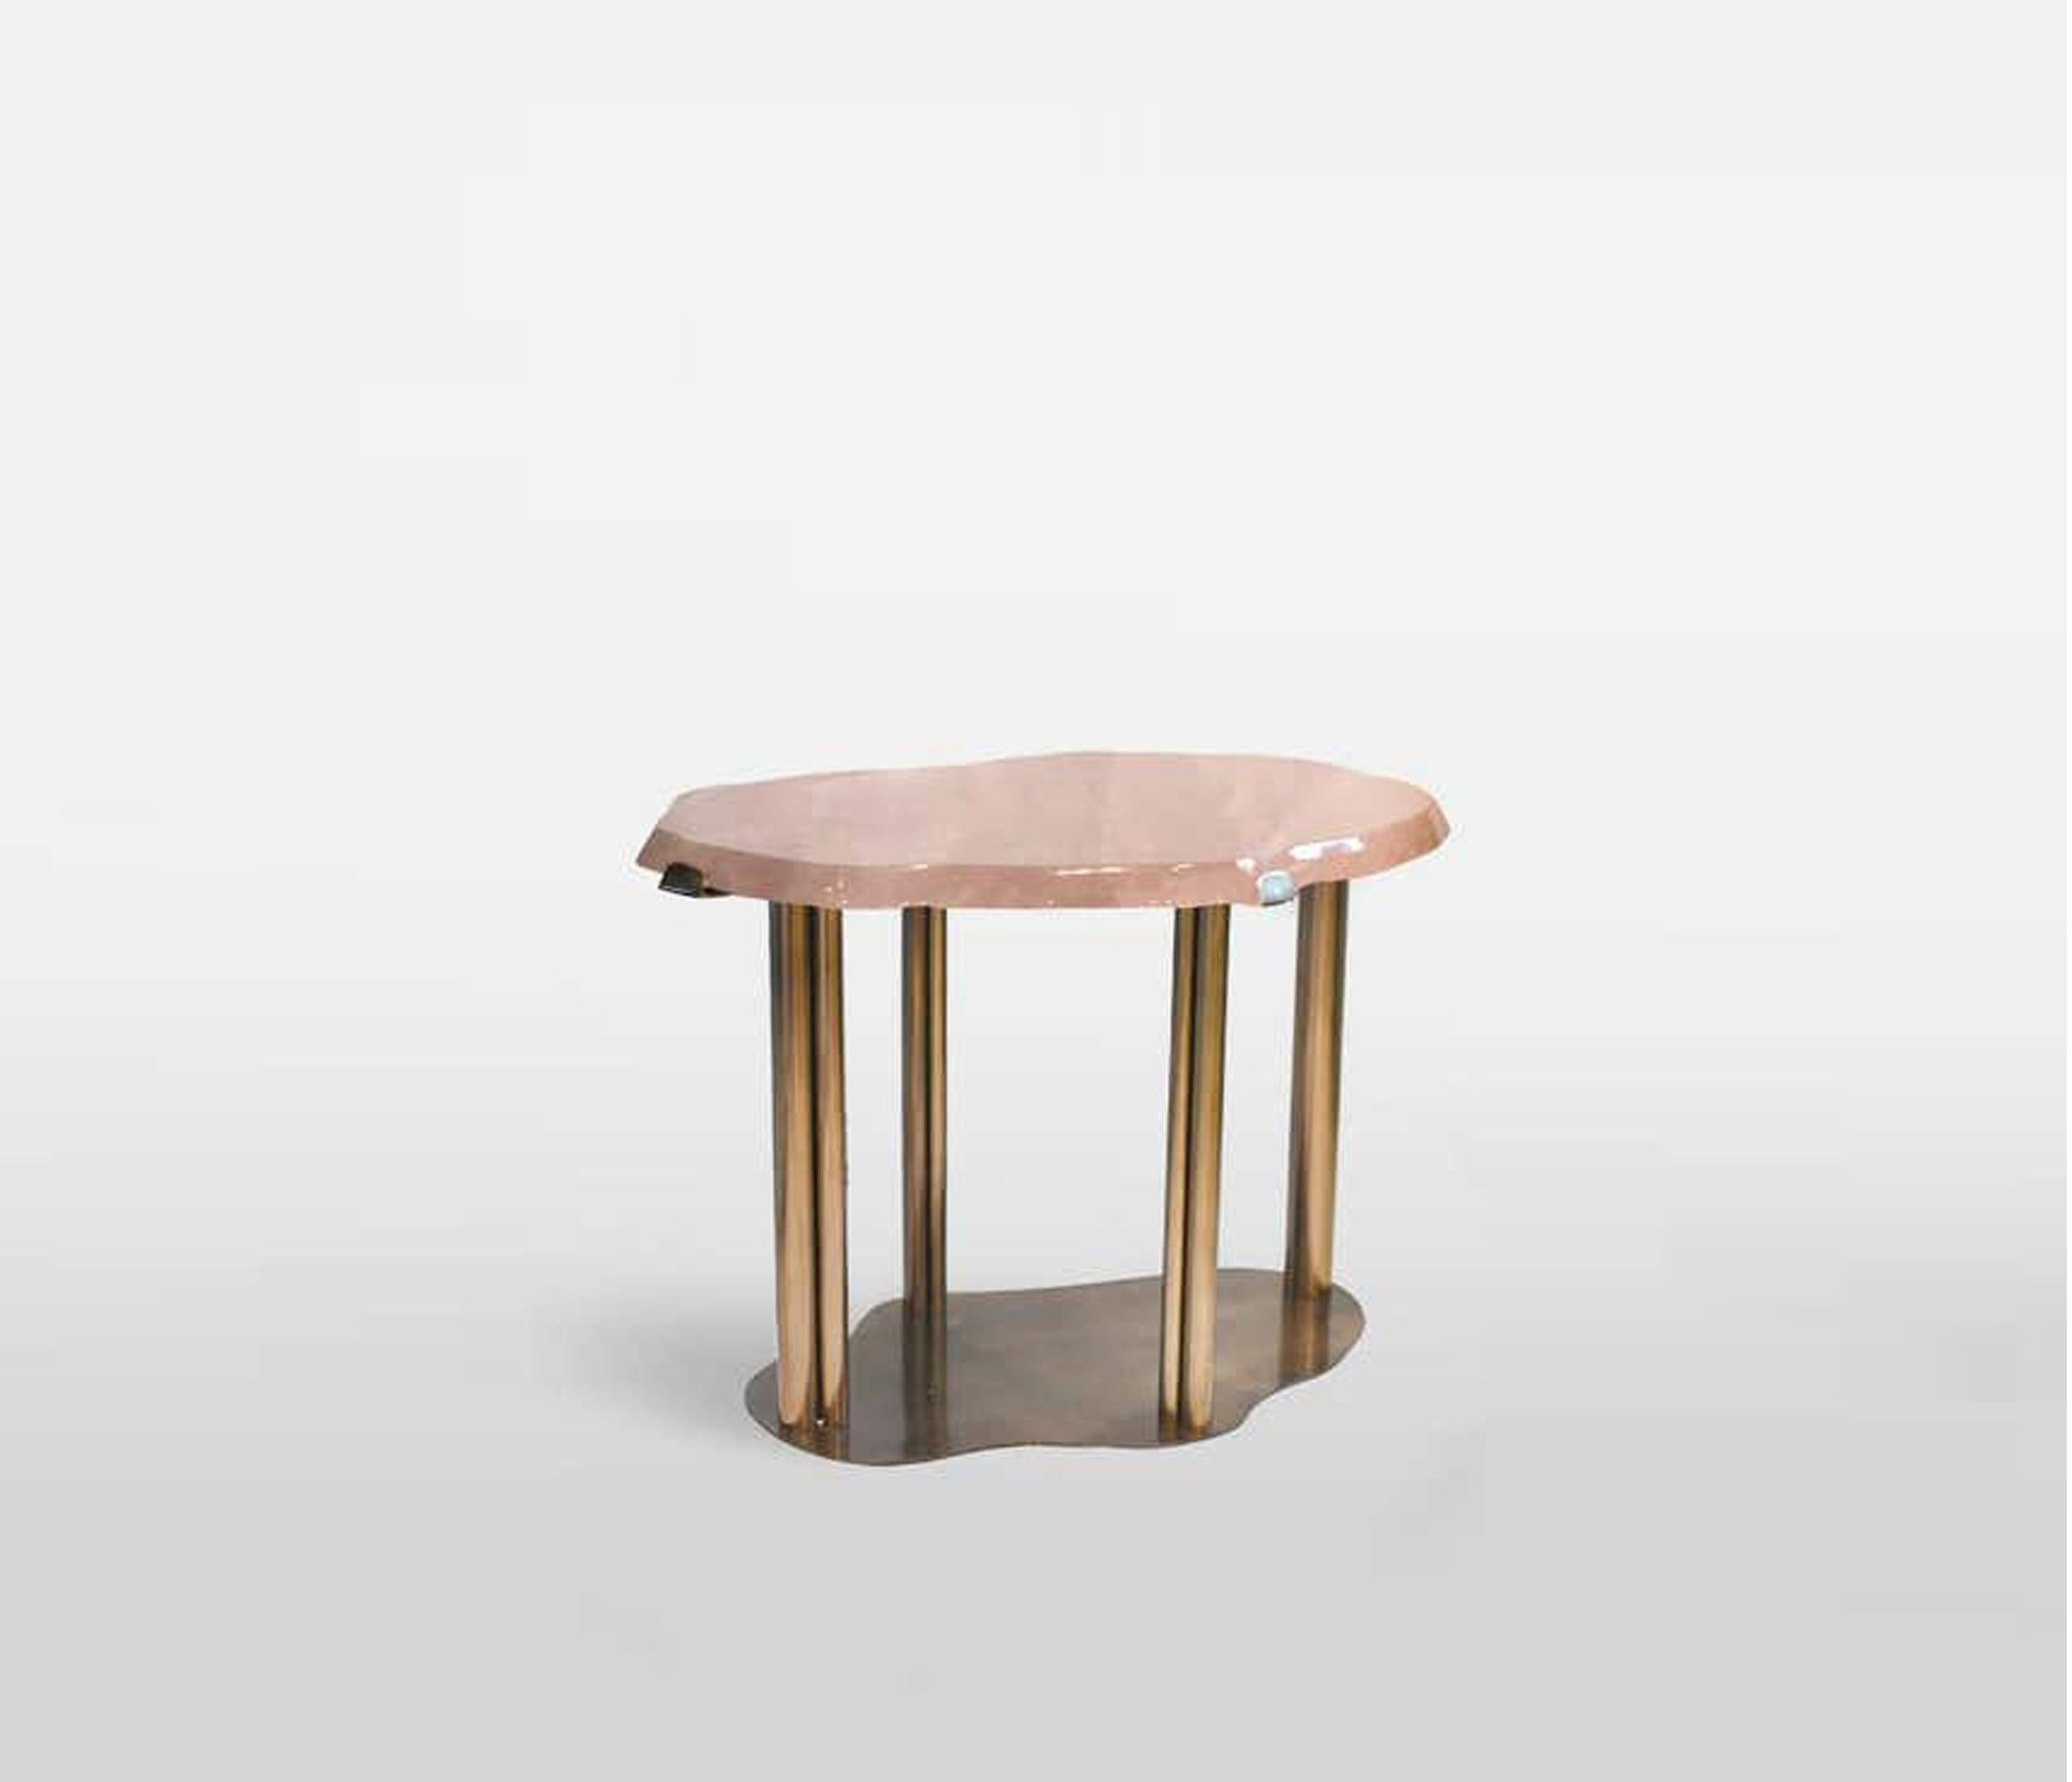 A fine carved cloud form rose rock crystal quartz cocktail table with antique brass finish. Created by Phoenix Gallery.
The listing price is $7,300. 